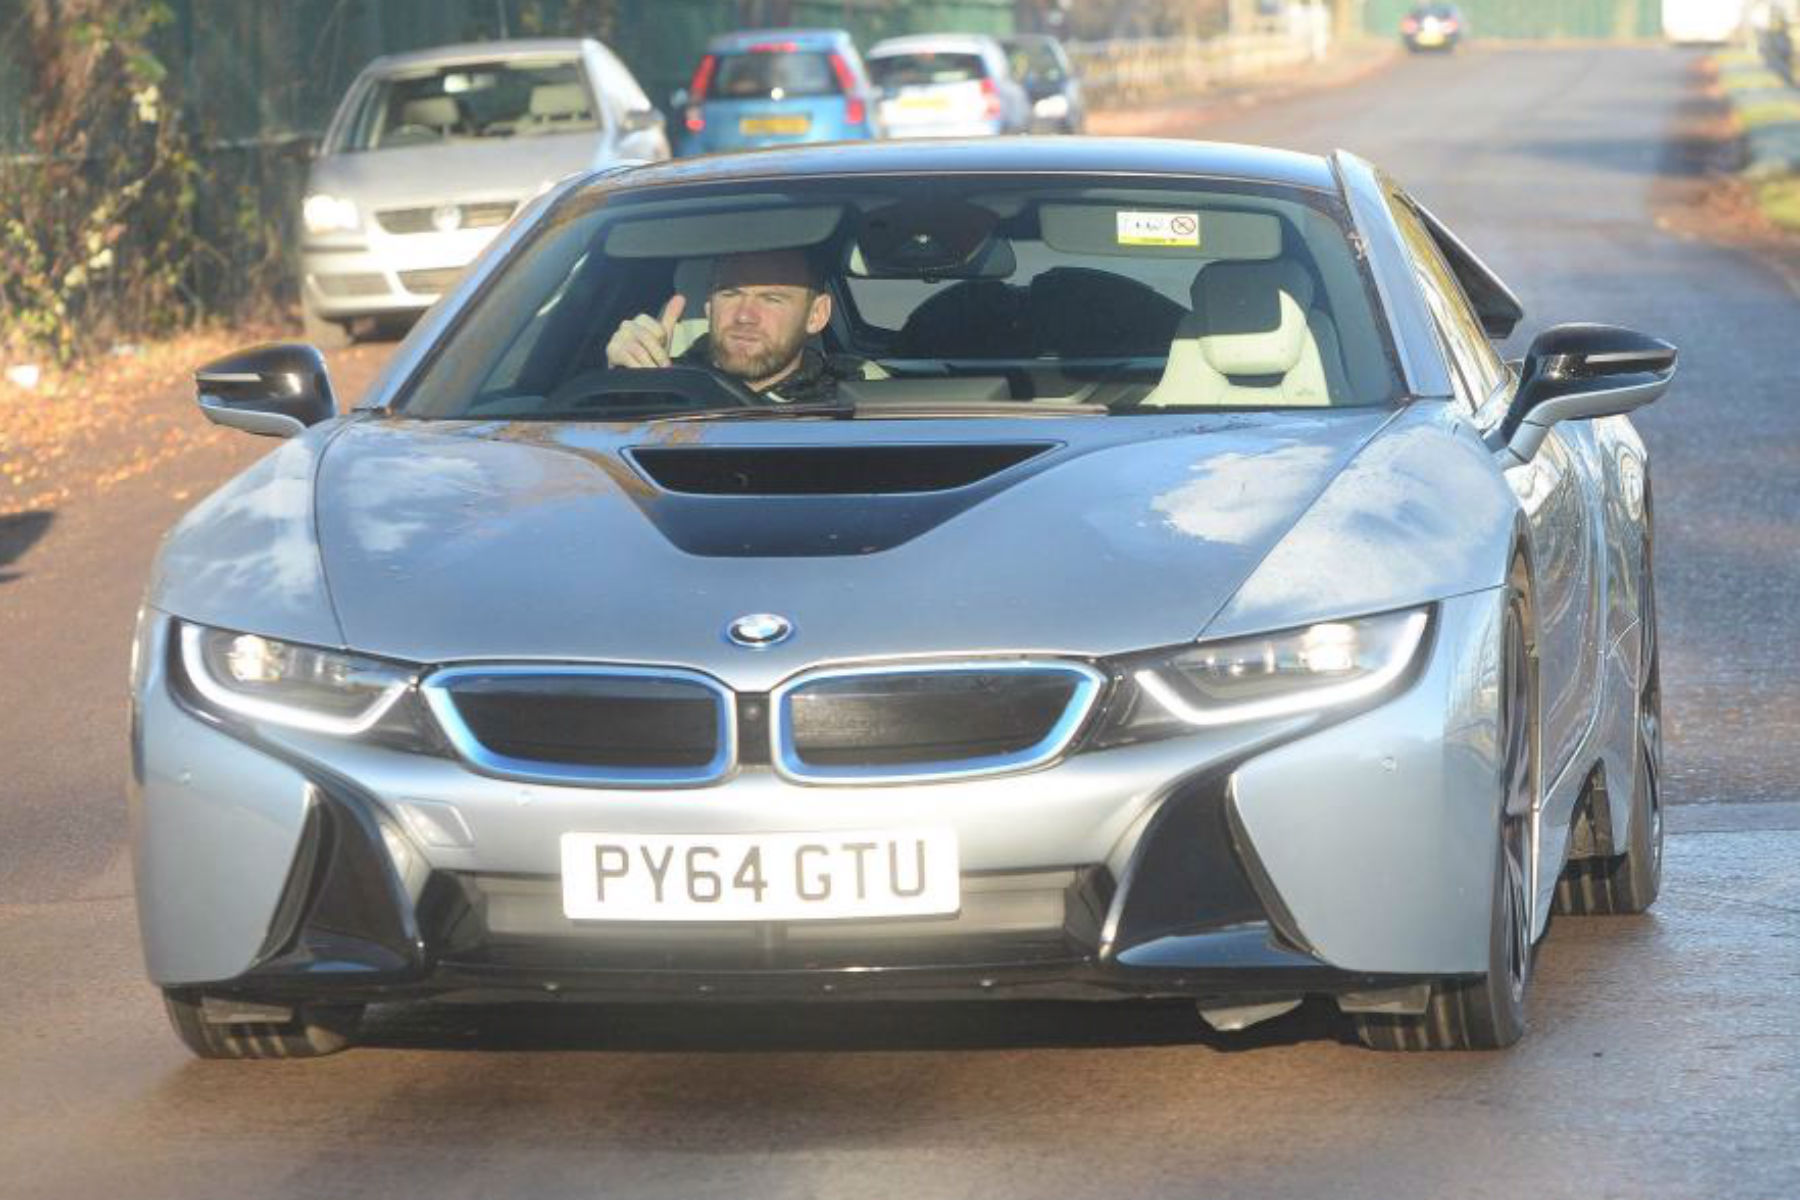 Wayne Rooney forced to flog supercar after drink-drive ban